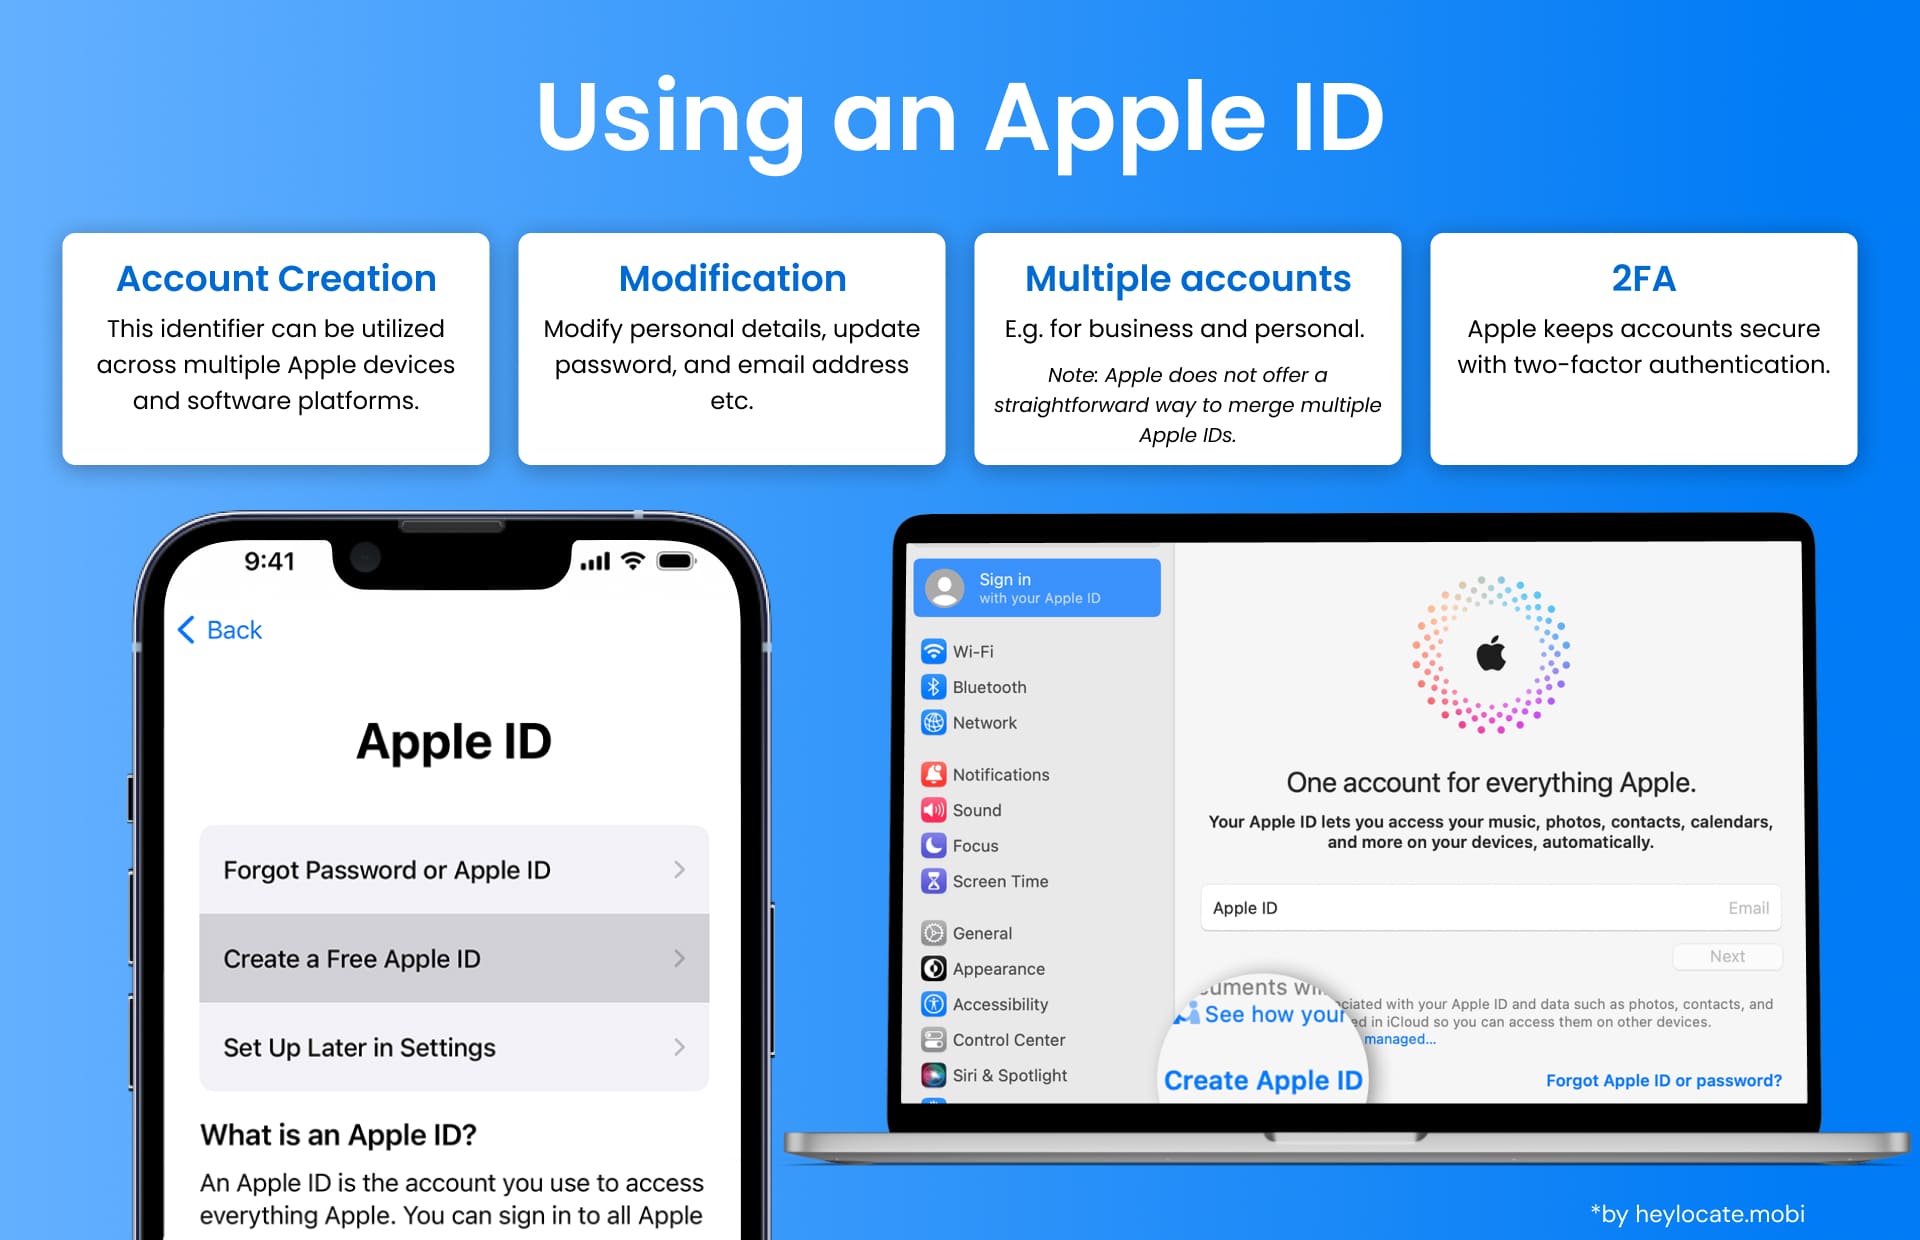 Informational graphic on using an Apple ID, featuring sections on Account Creation, Modification, Multiple Accounts, and 2FA. It shows an iPhone with the Apple ID login screen, and a MacBook with the Apple ID account management screen